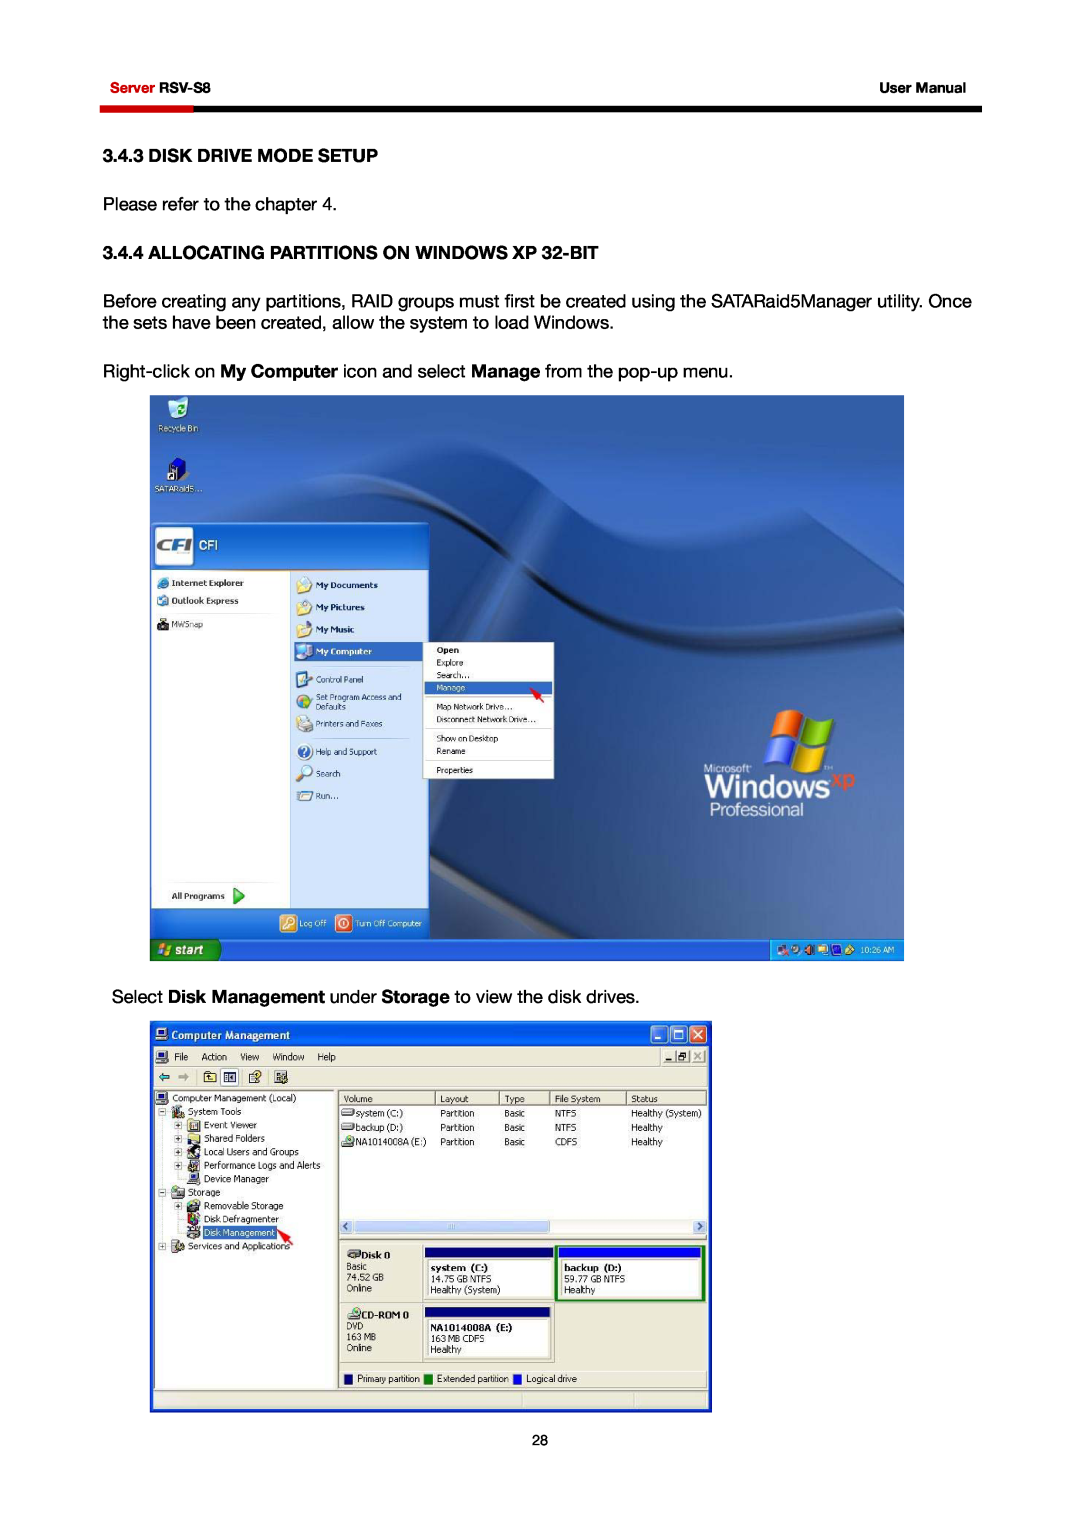 Rosewill RSV-S8 user manual Disk Drive Mode Setup, ALLOCATING PARTITIONS ON WINDOWS XP 32-BIT 